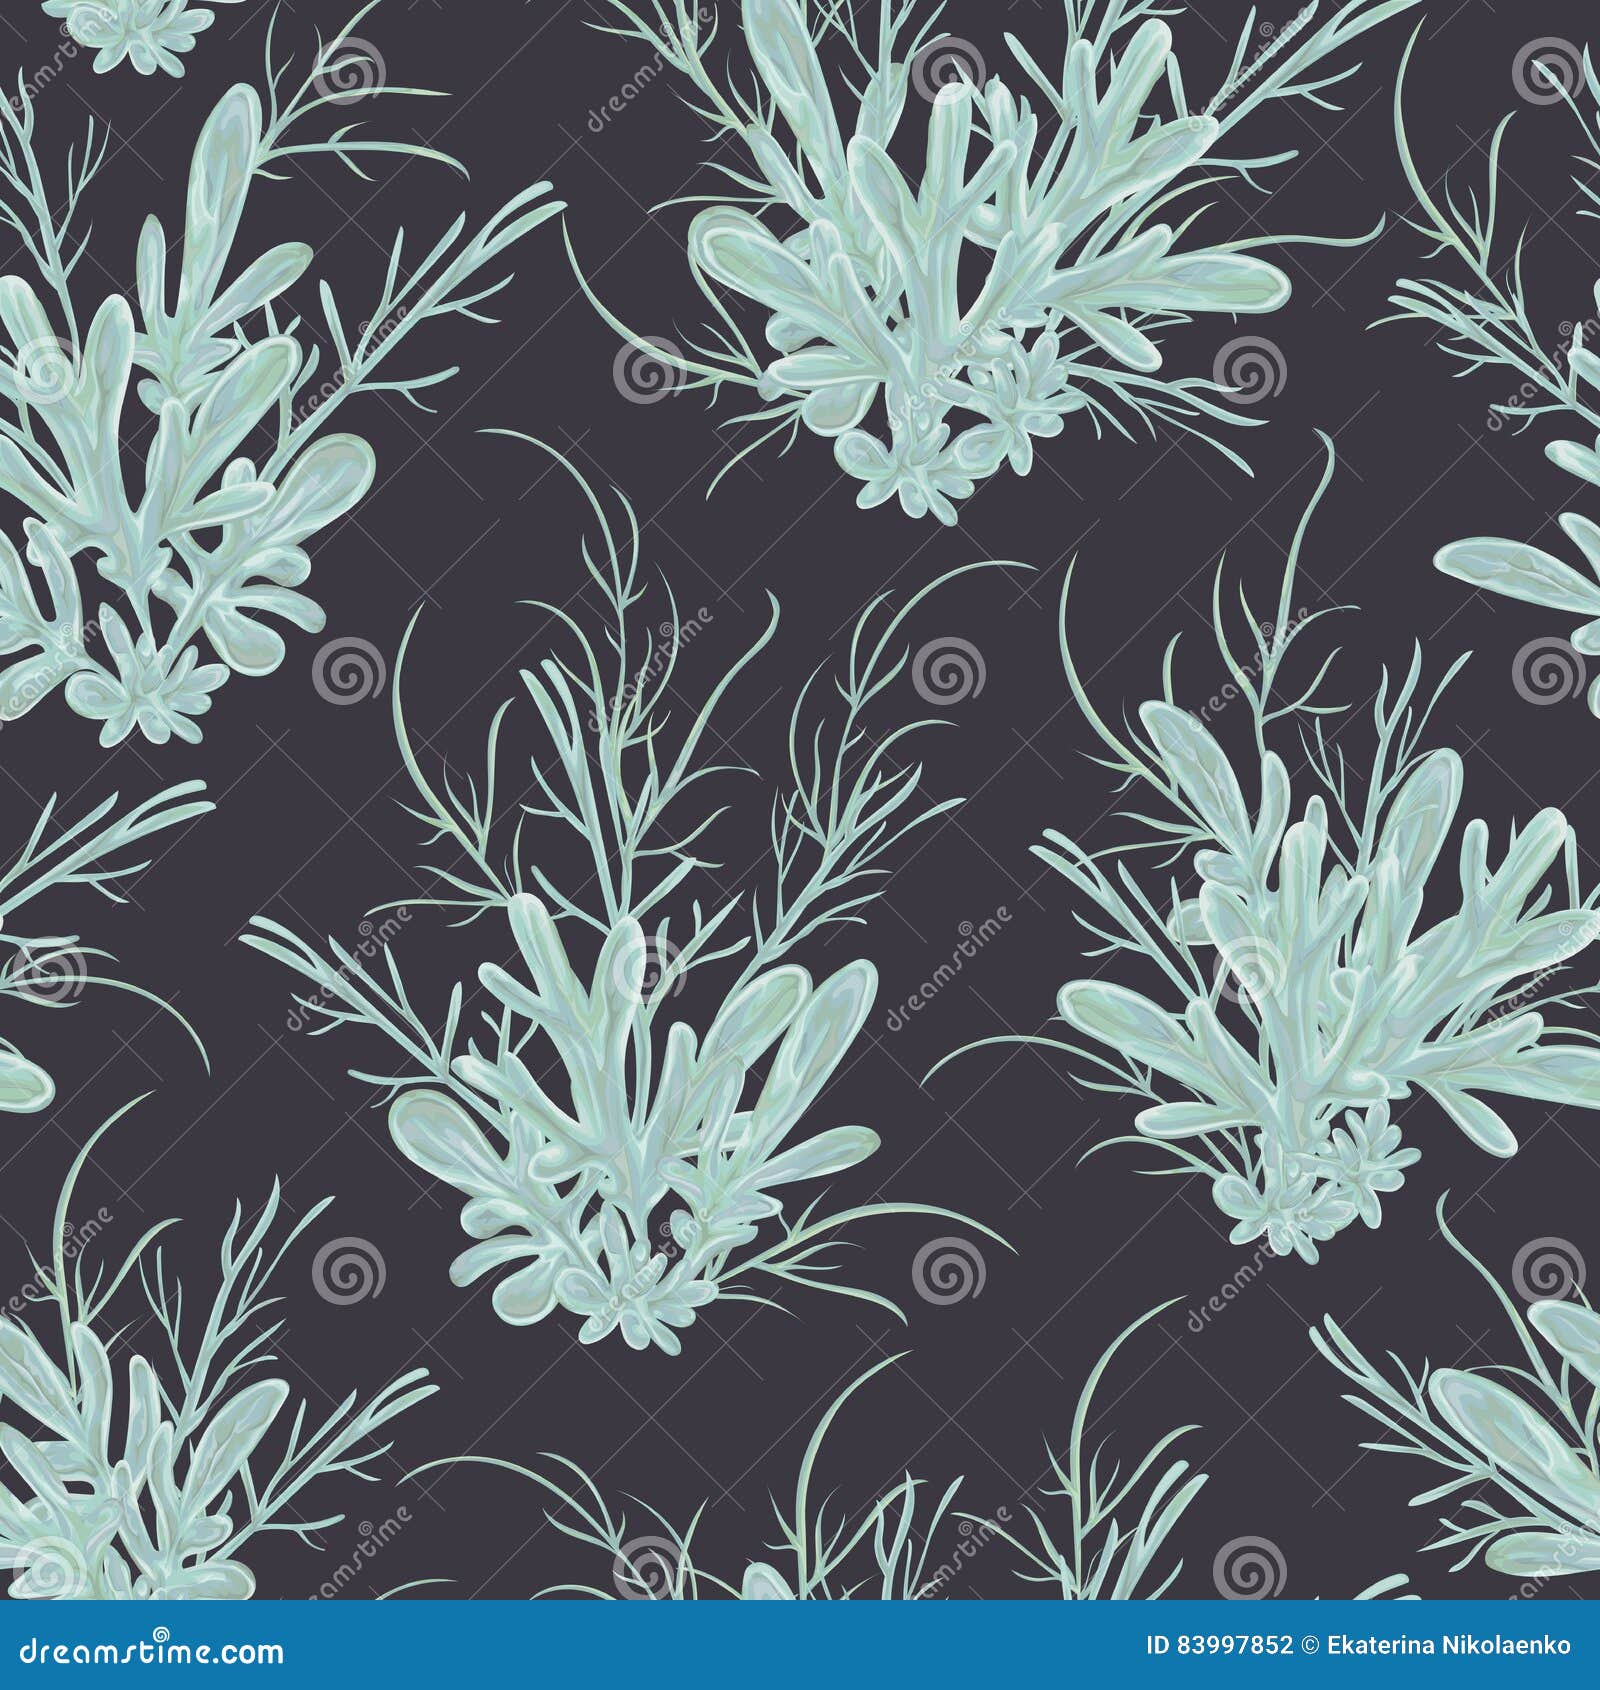 seamless pattern with sagebrush. rustic floral background.